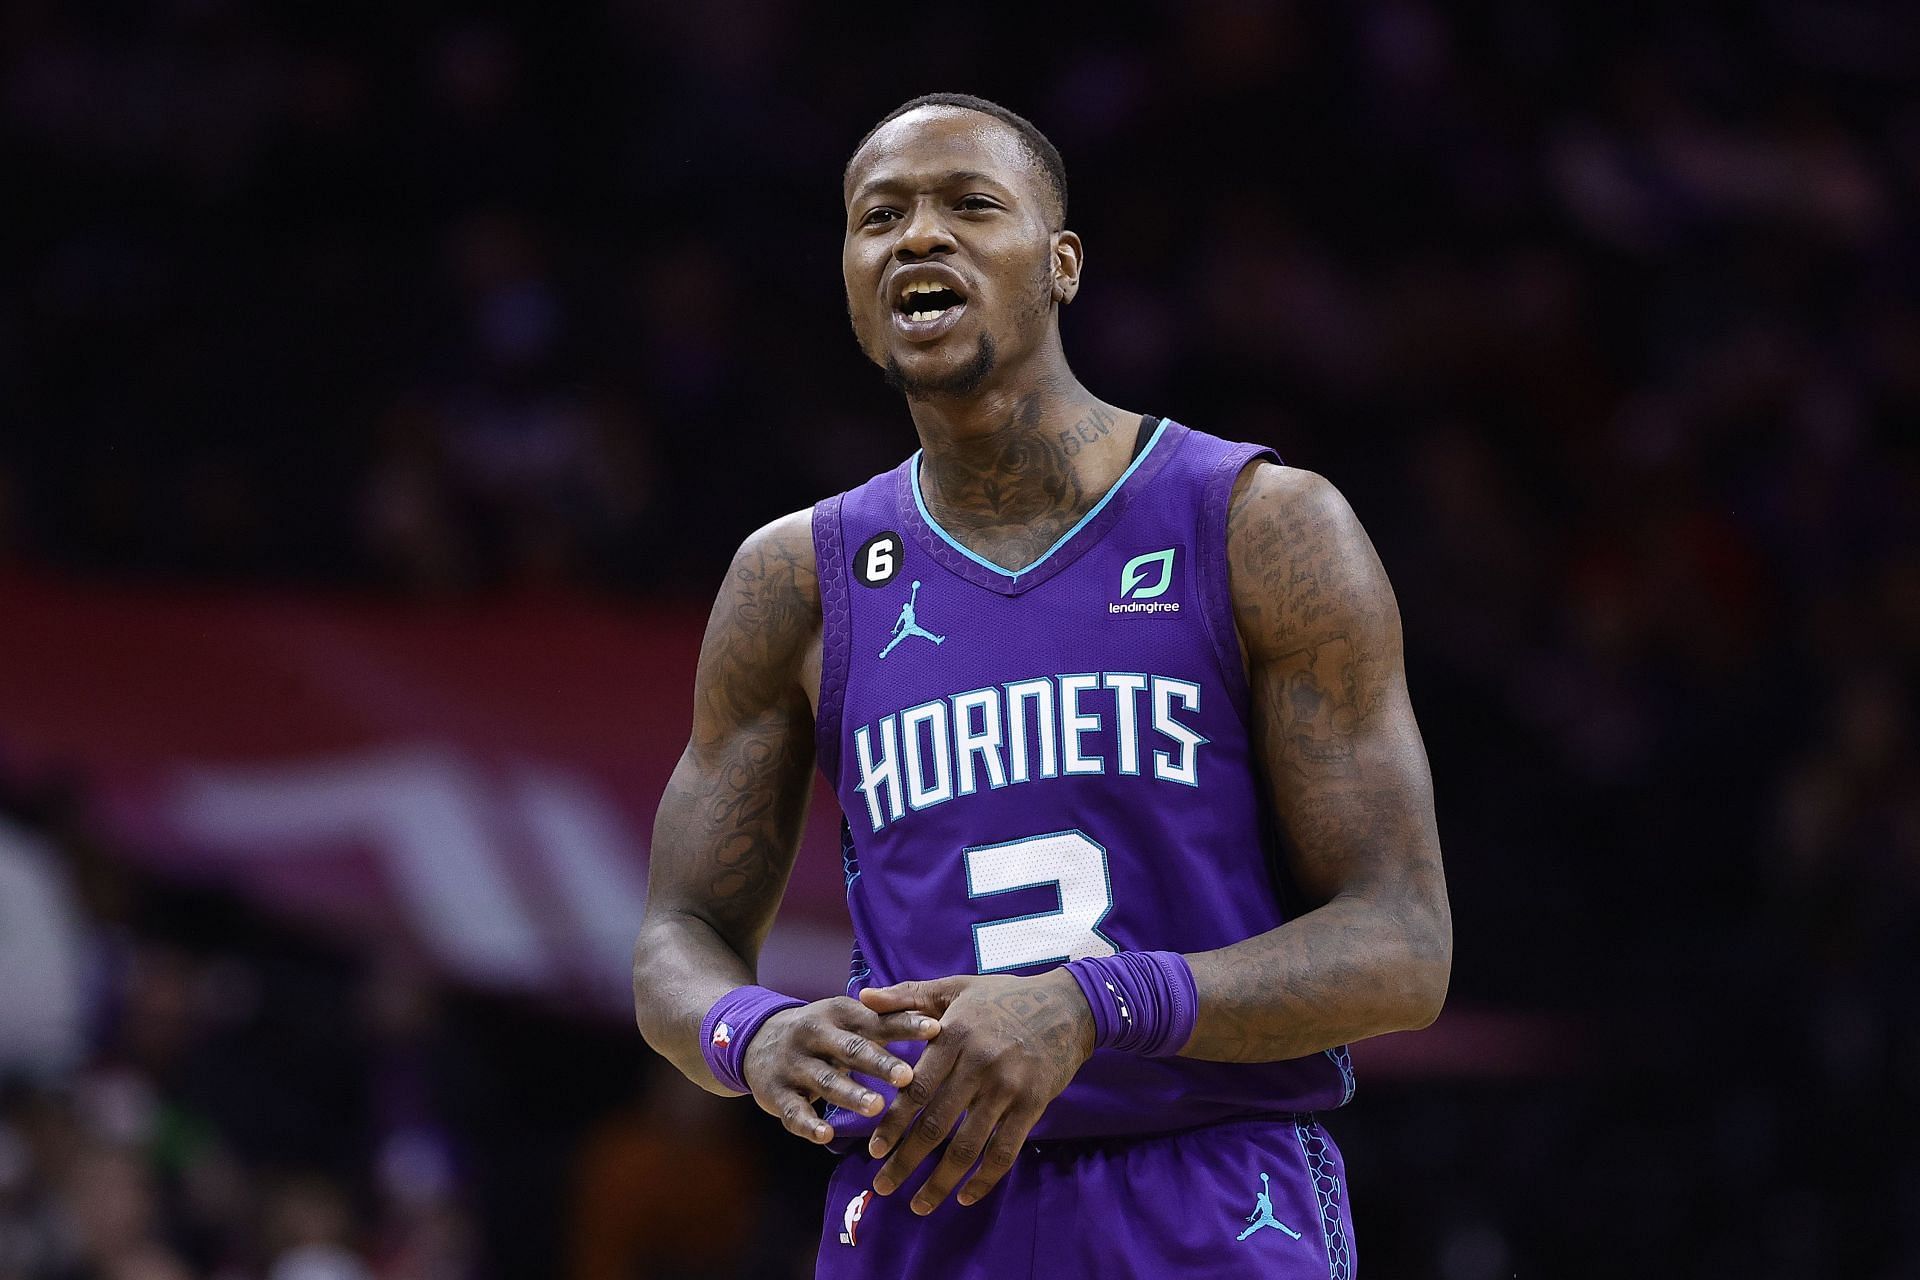 Charlotte Hornets guard Terry Rozier